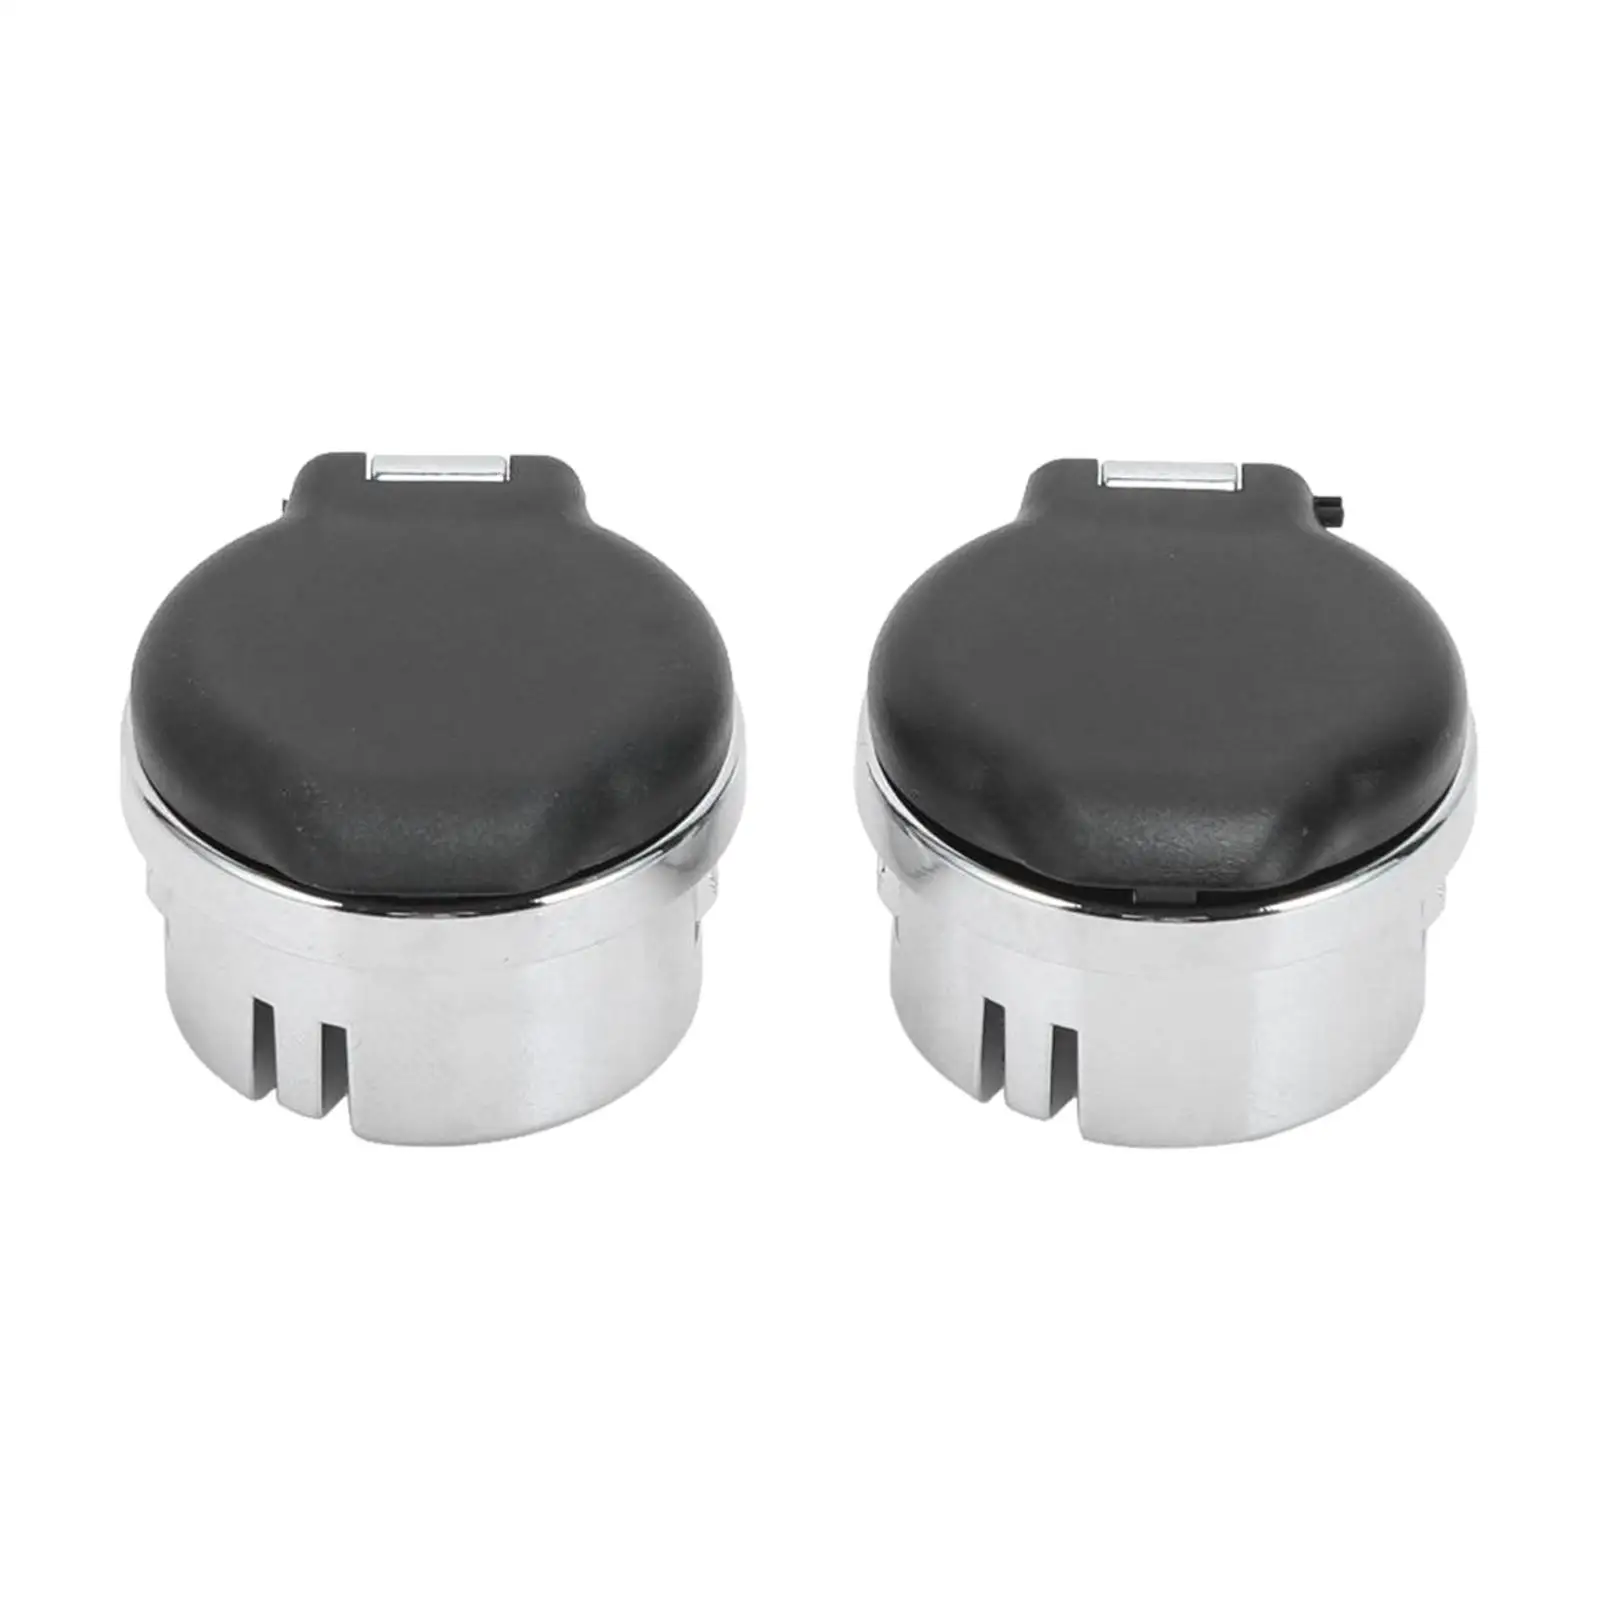 2Pcs Power Outlet Covers 20983936 Cigarette Lighter Plug Cover for Chevrolet Sierra Silverado Replacement Easy Installation